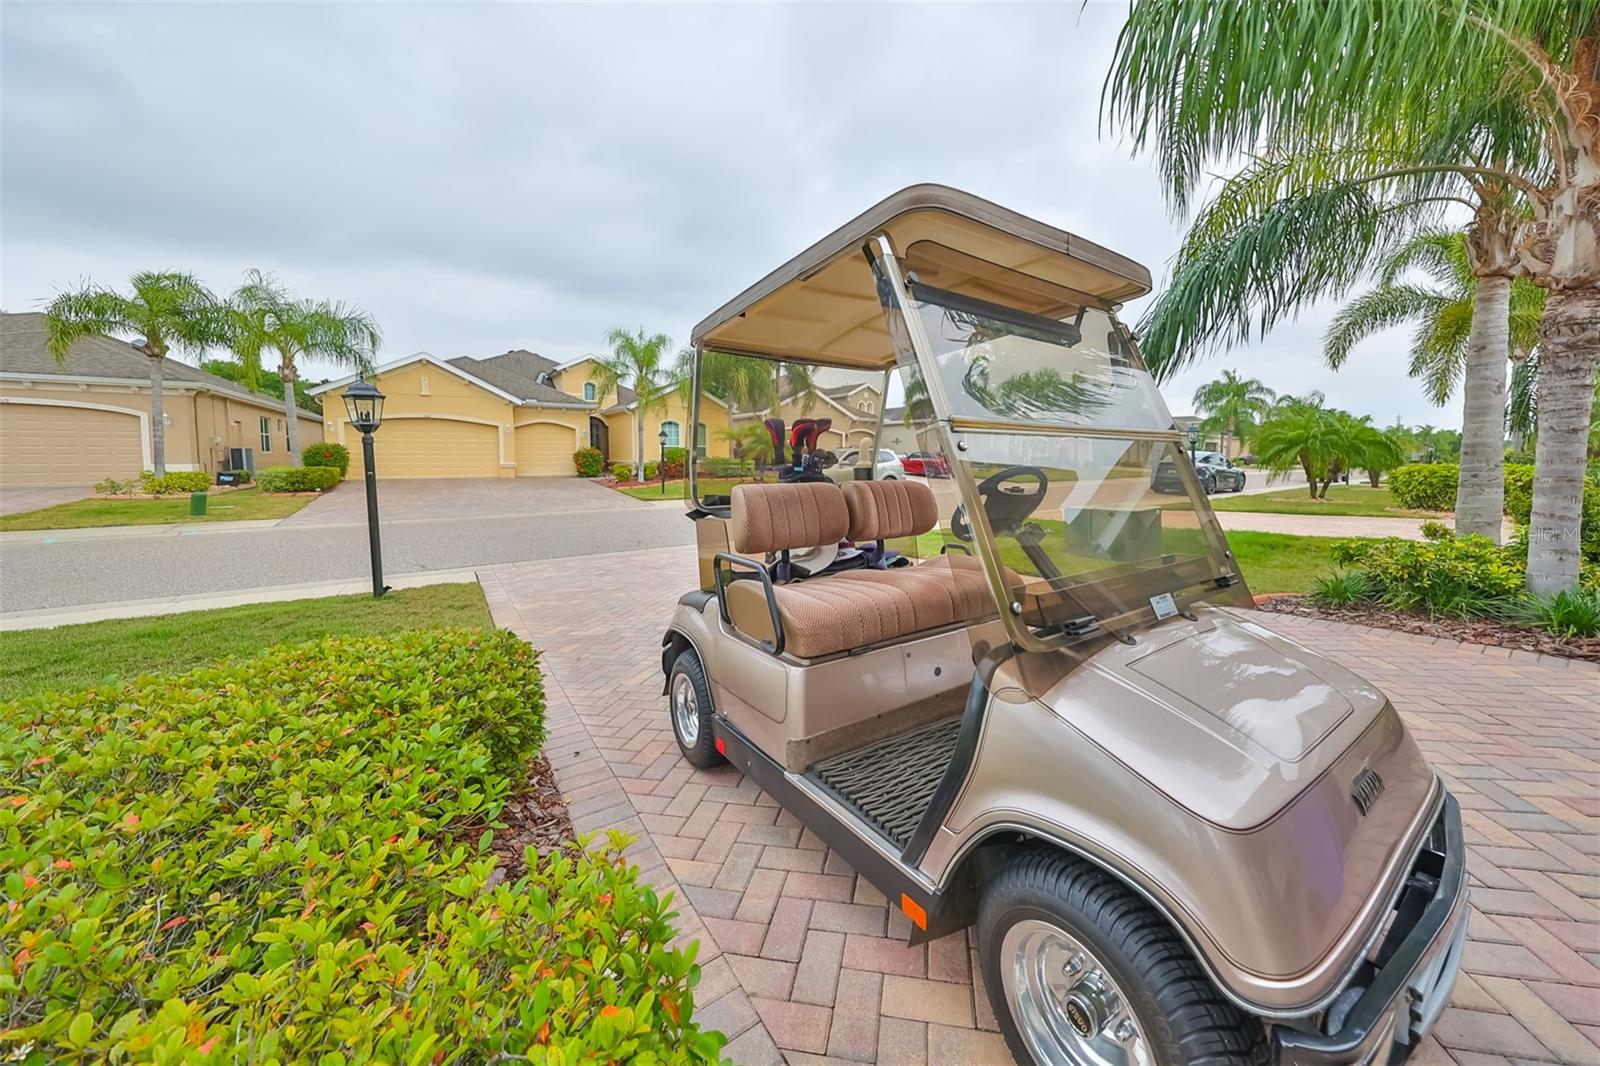 Golf Cart has recently had batteries and charger updated.  The owner is an avid golfer and has kept this cart in mint condition.  THIS GOLF CART CONVEYS WITH THE SALE OF THE HOME.